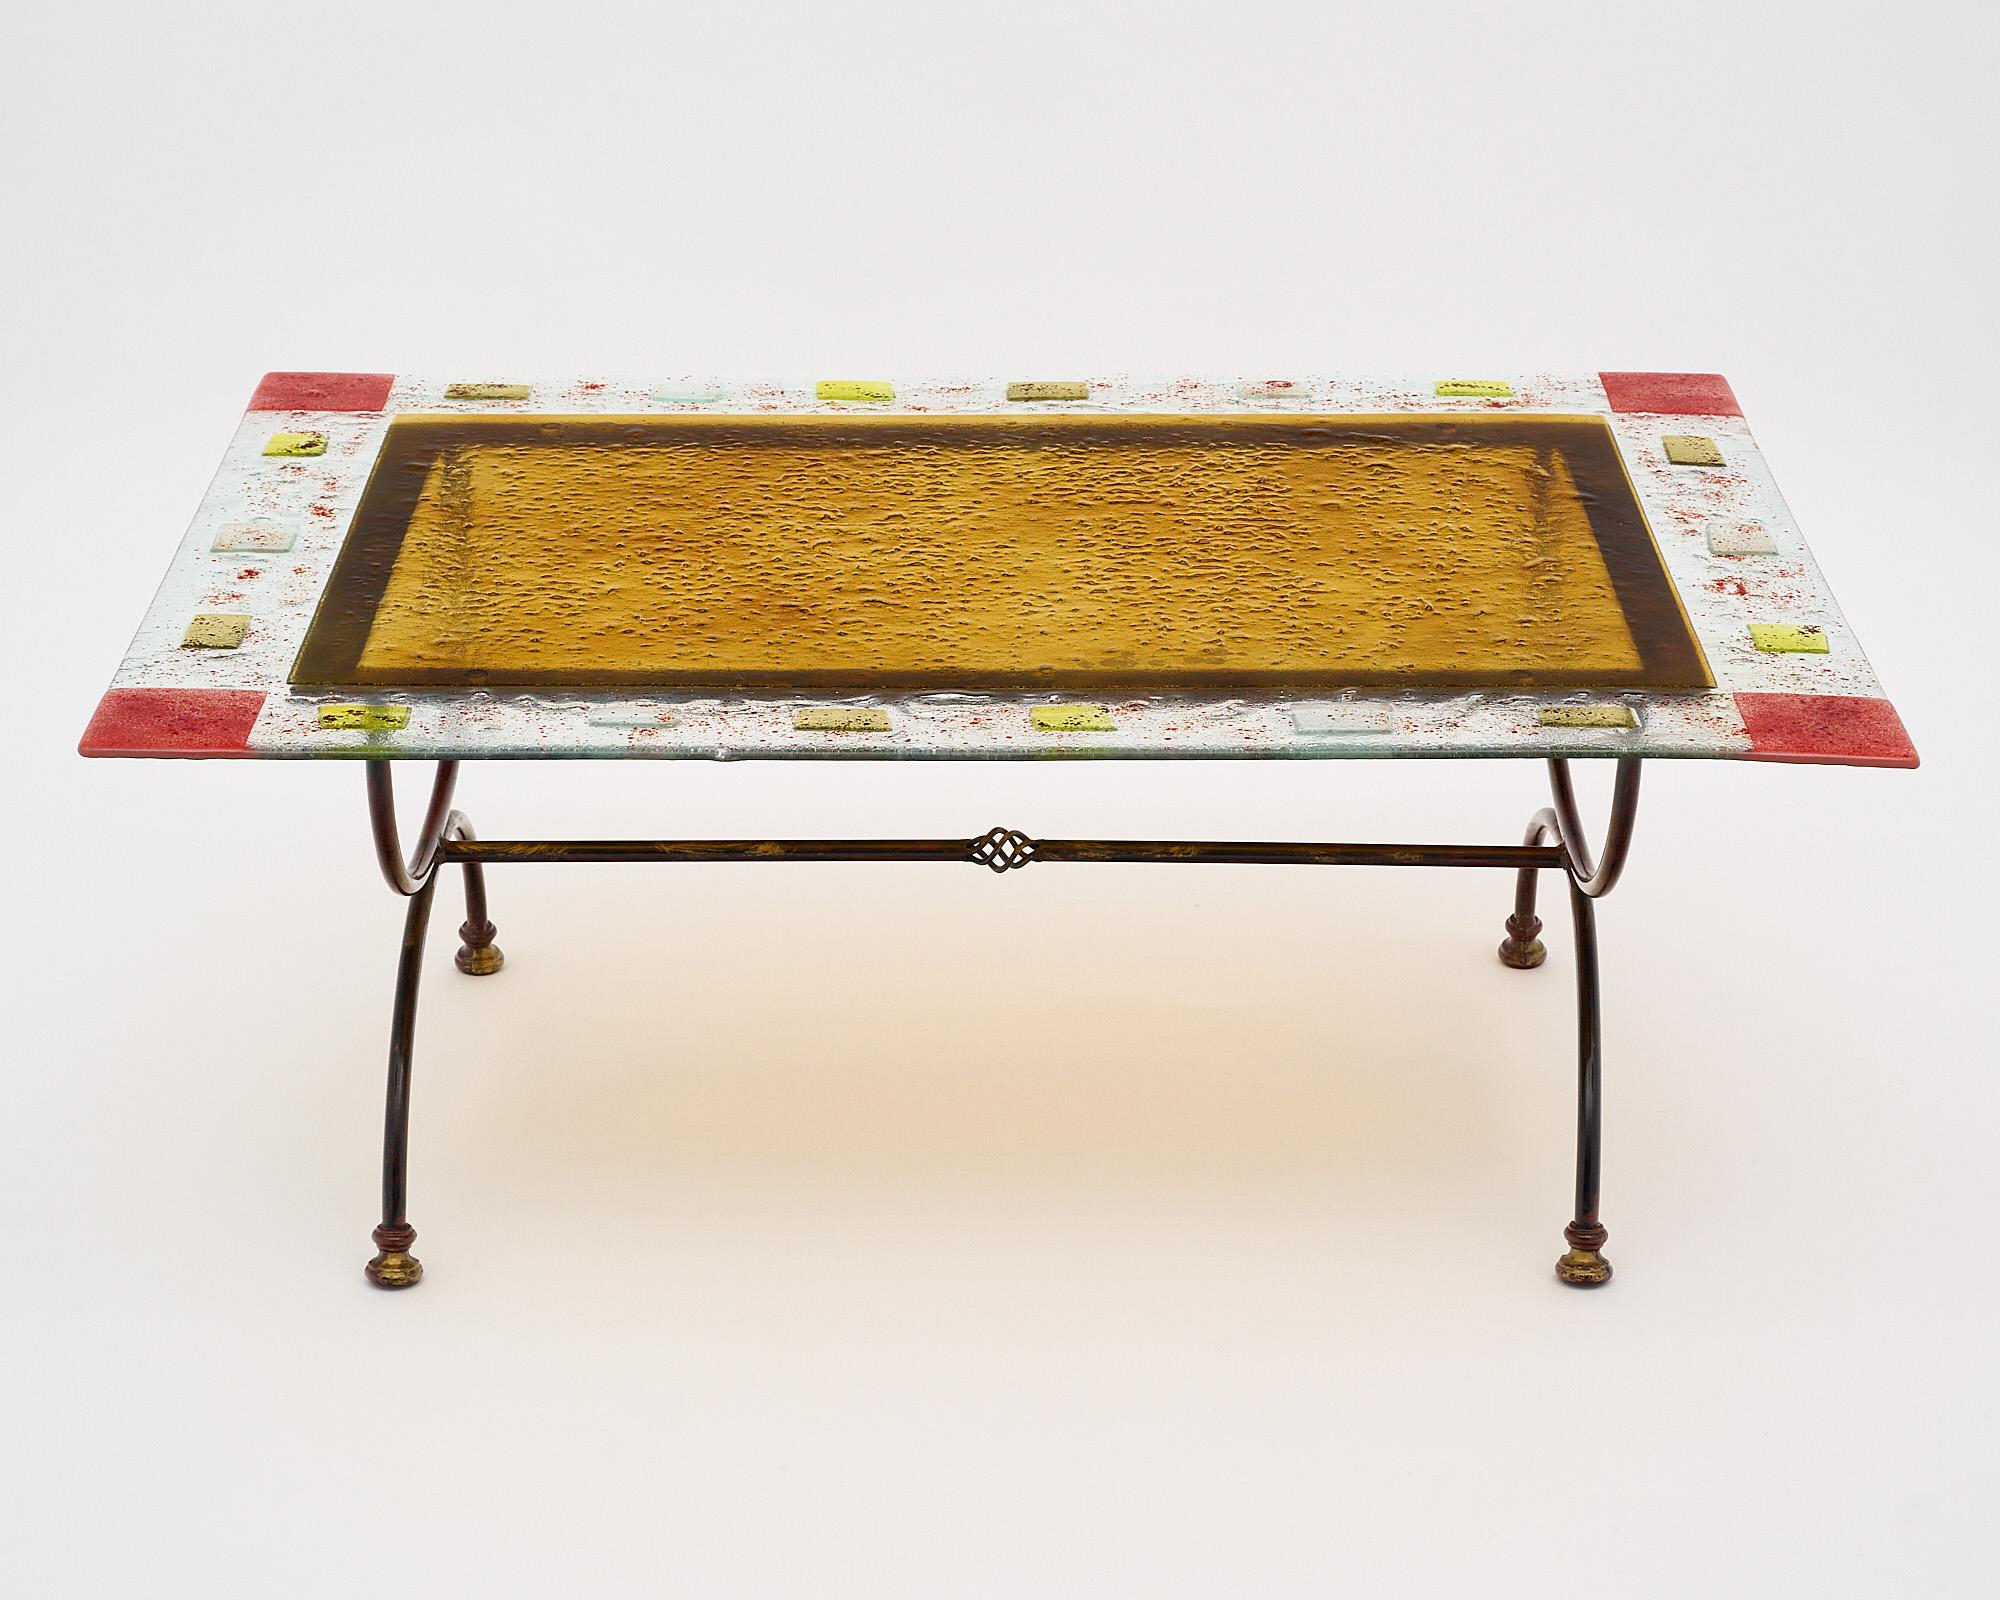 Coffee table, Italian, from the Veneto region. This piece has a hand-hammered forged iron base supporting a slab of Murano glass featuring a colorful fused glass decor.
